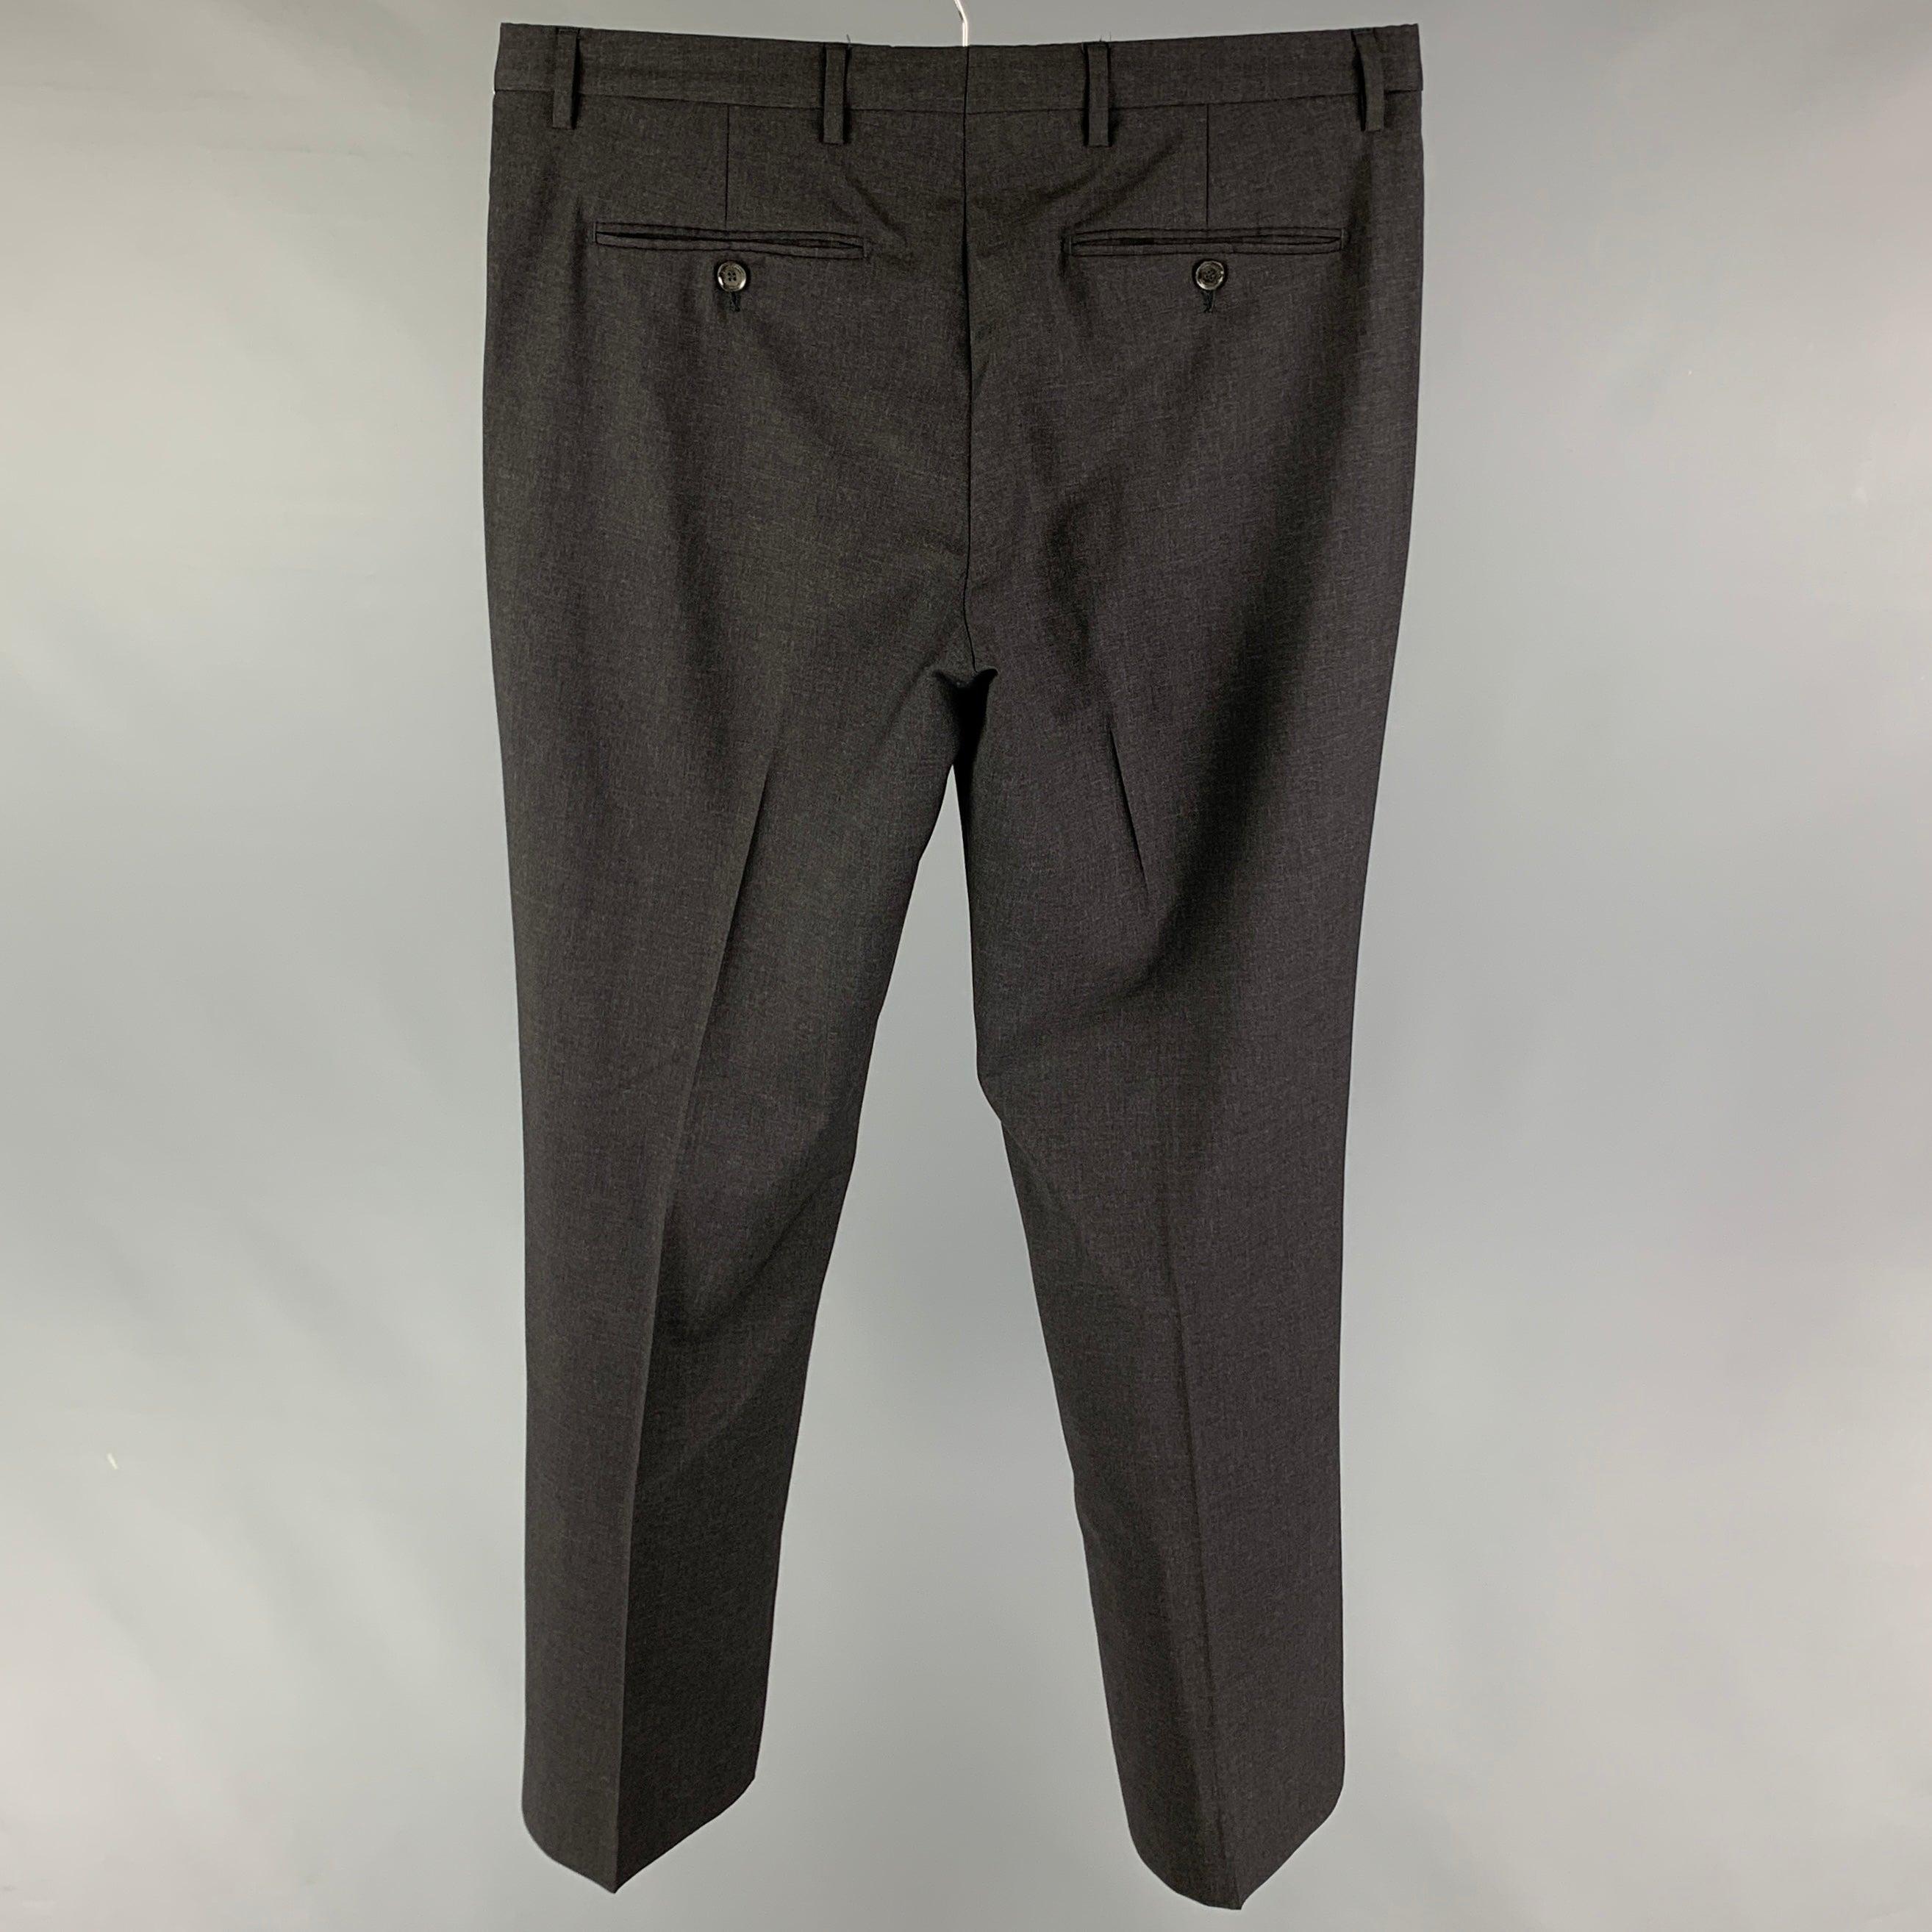 BURBERRY LONDON dress pants comes in a charcoal virgin wool featuring a flat front, front tab, and a zip fly closure. Made in Portugal.
Very Good
Pre-Owned Condition. 

Marked:   50-34 

Measurements: 
  Waist: 34 inches  Rise: 9.5 inches  Inseam: